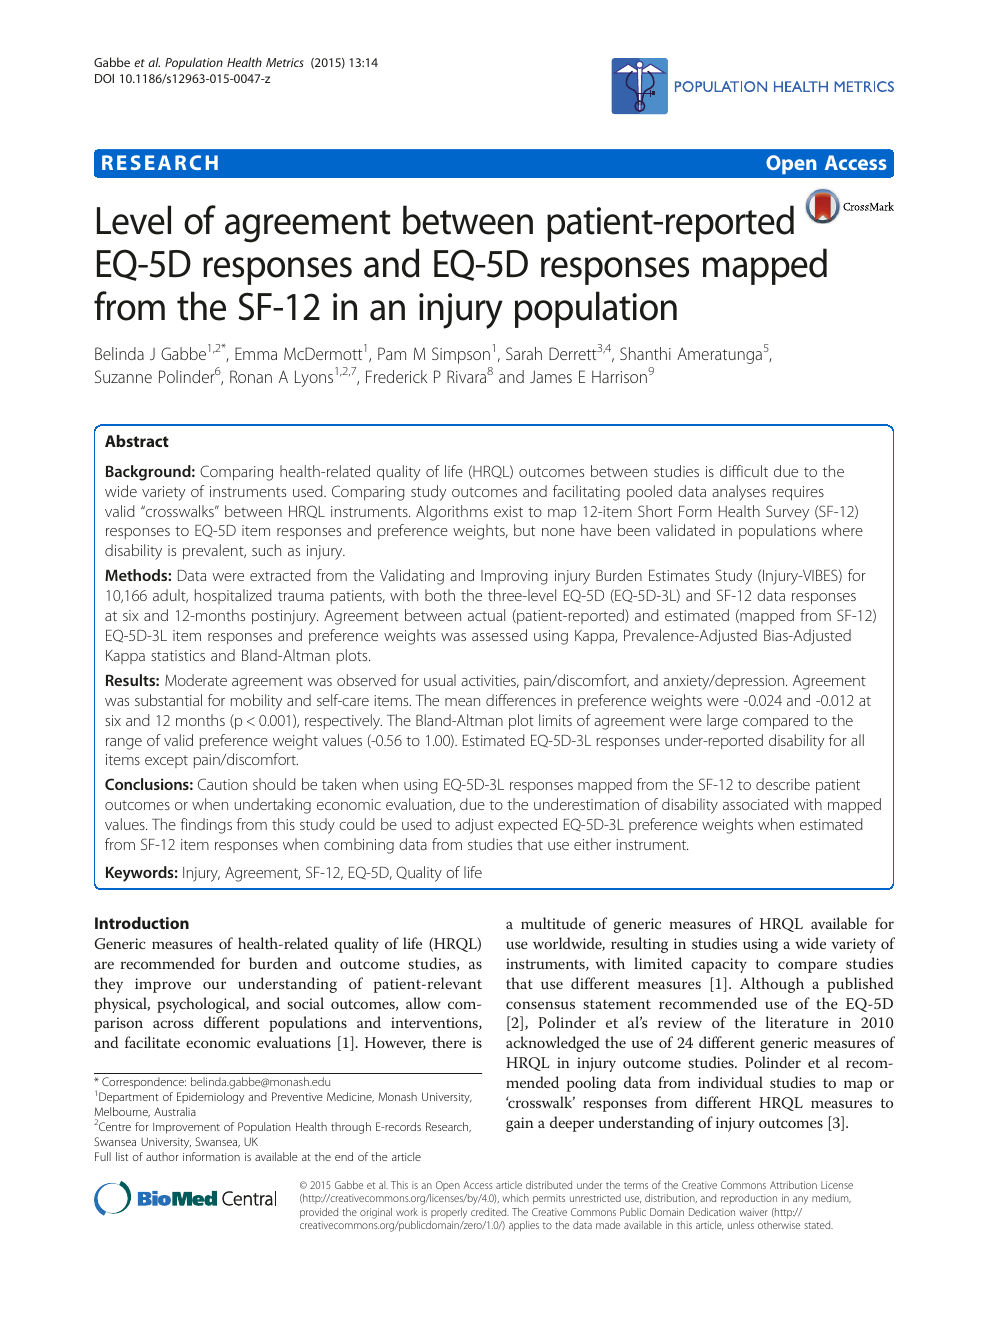 Absorbere æg Frem Level of agreement between patient-reported EQ-5D responses and EQ-5D  responses mapped from the SF-12 in an injury population – topic of research  paper in Health sciences. Download scholarly article PDF and read